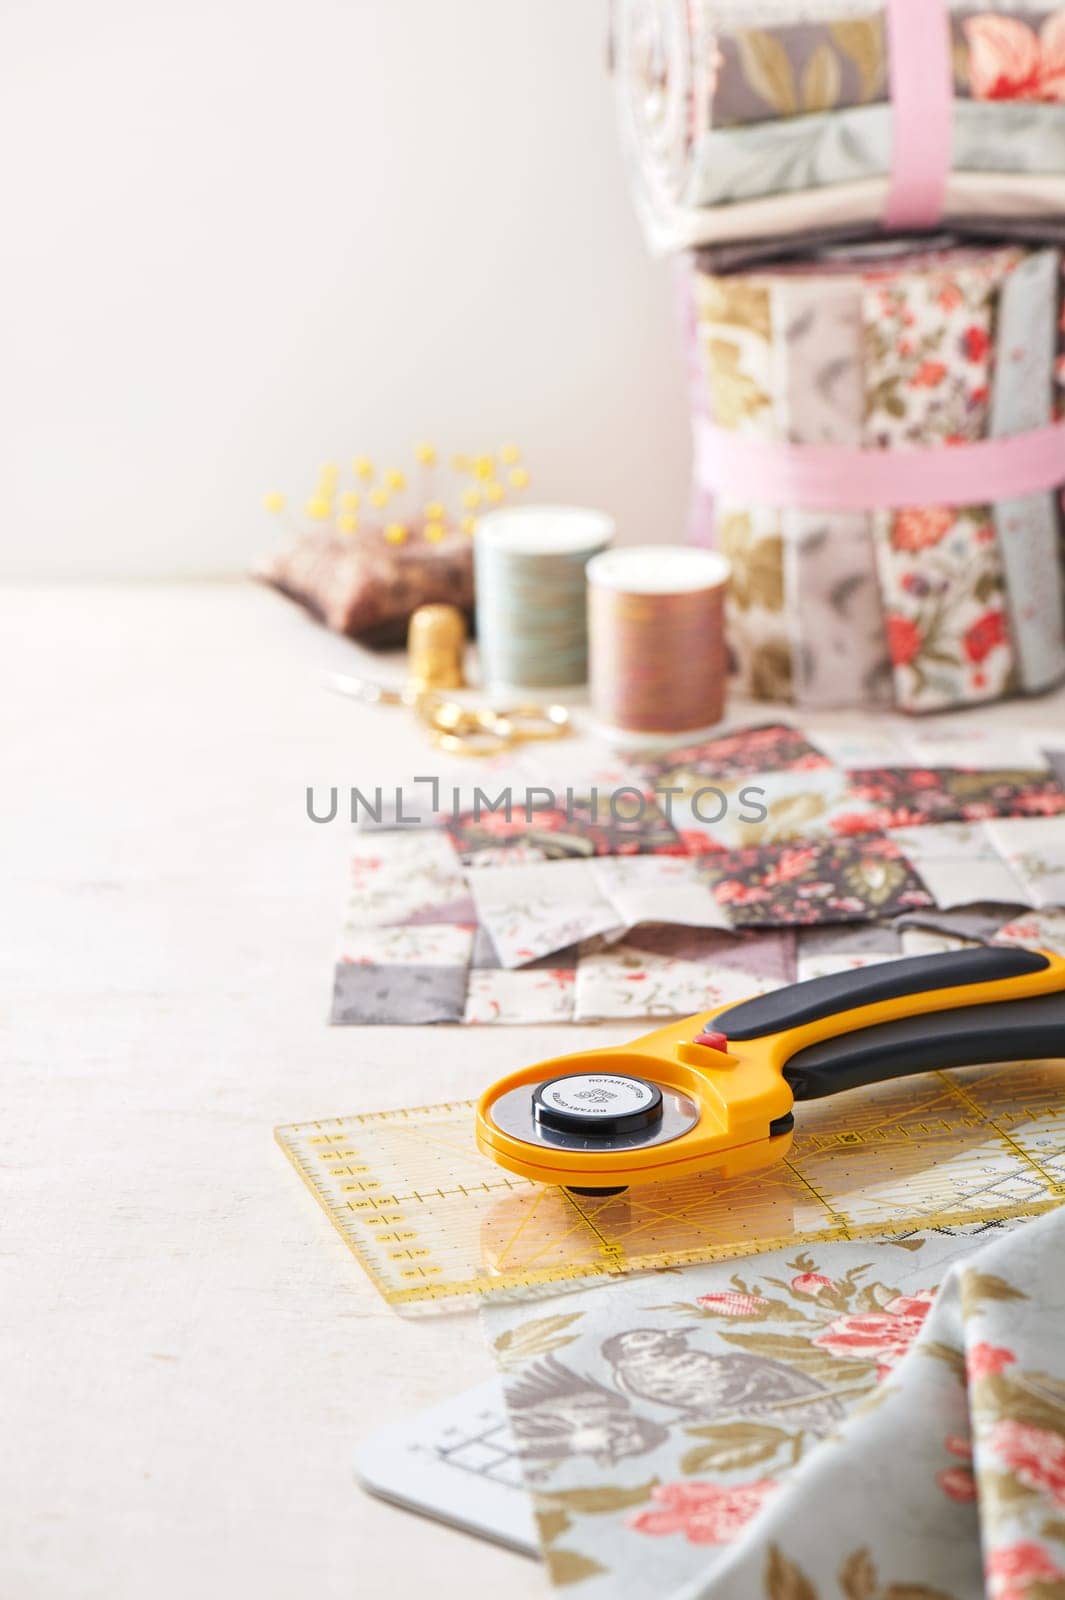 Patchwork blocks, rolls of fabric, sewing accessories on white surface